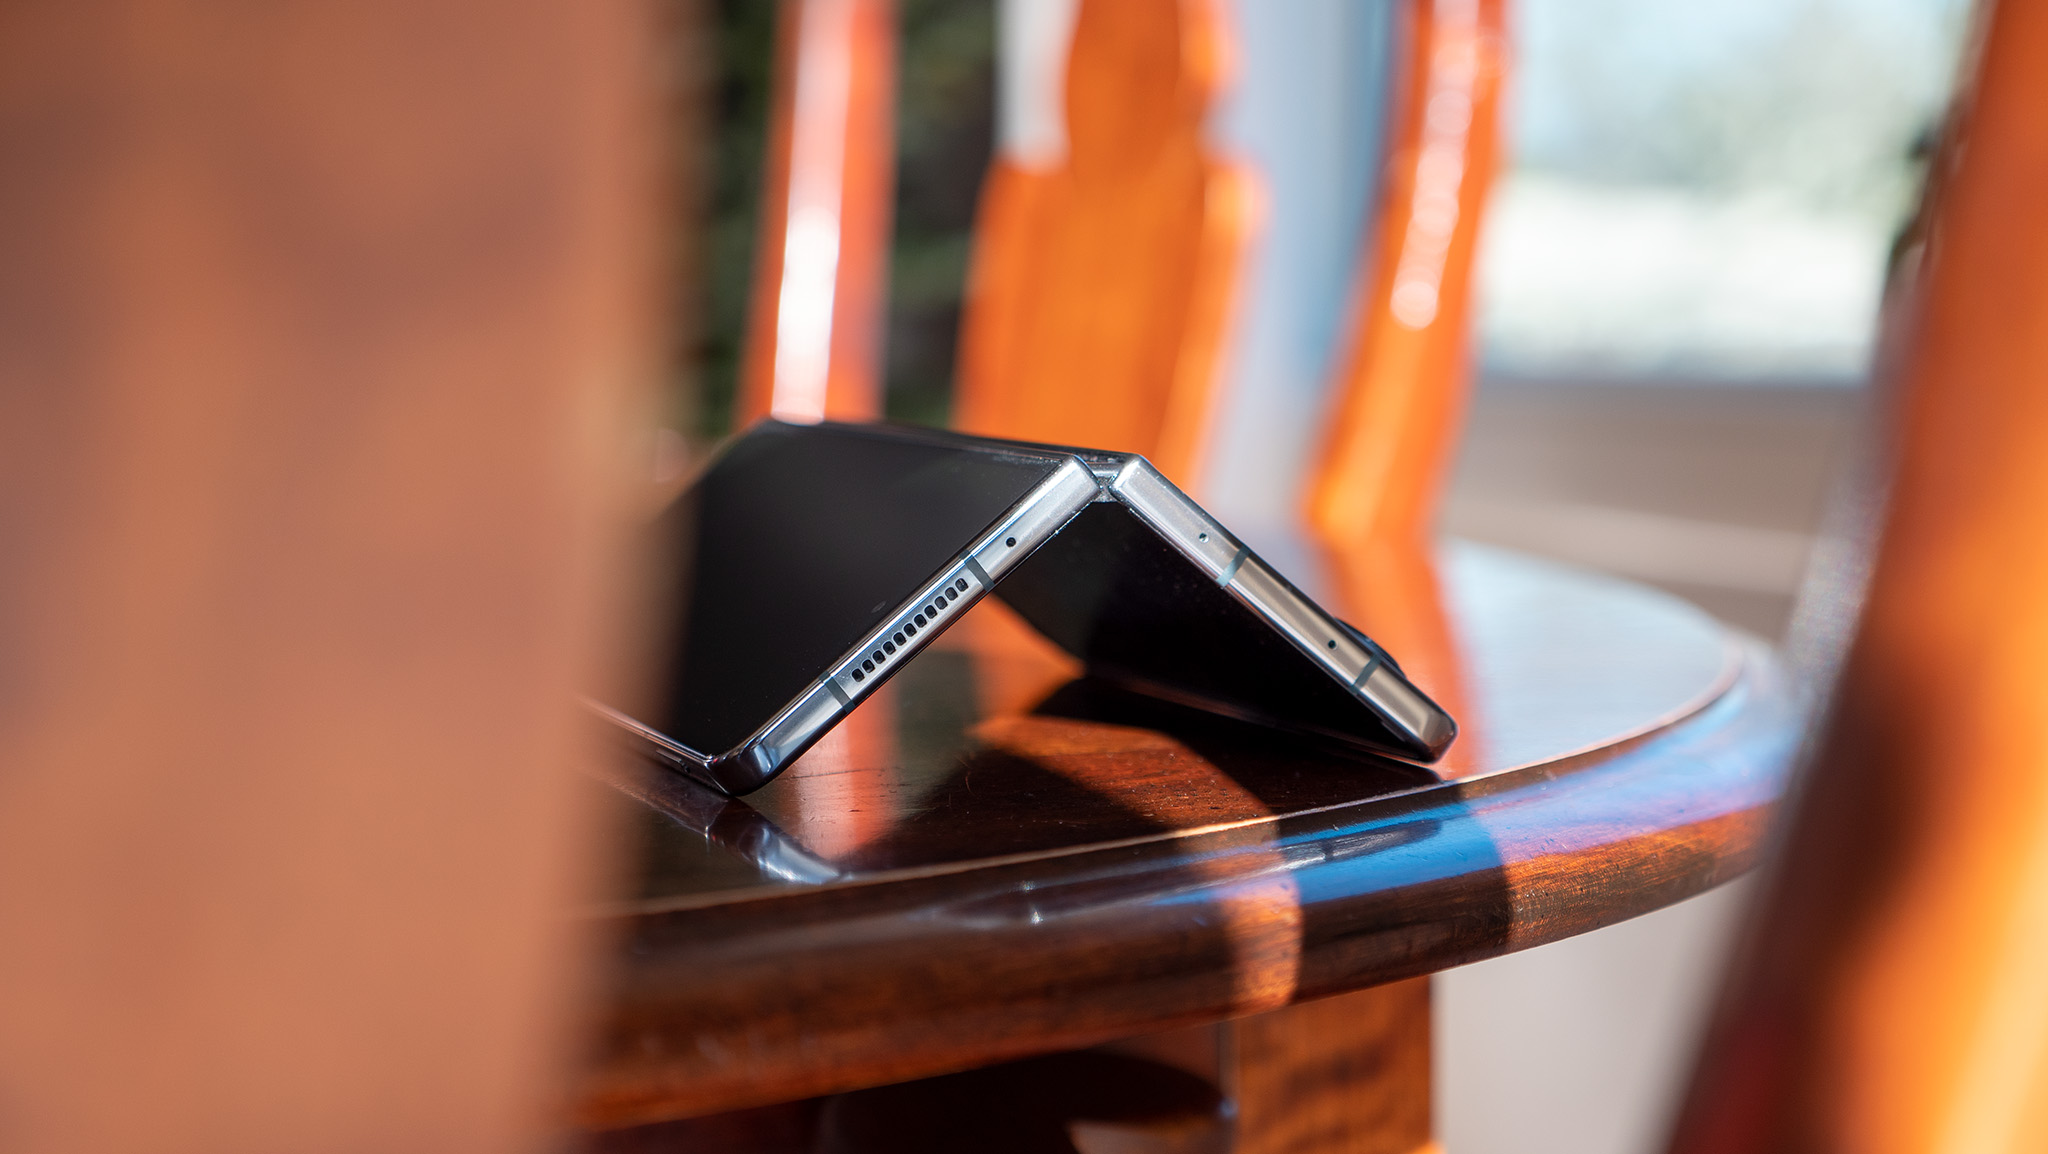 Samsung Galaxy Z Fold 4 in flex mode tenting on a table